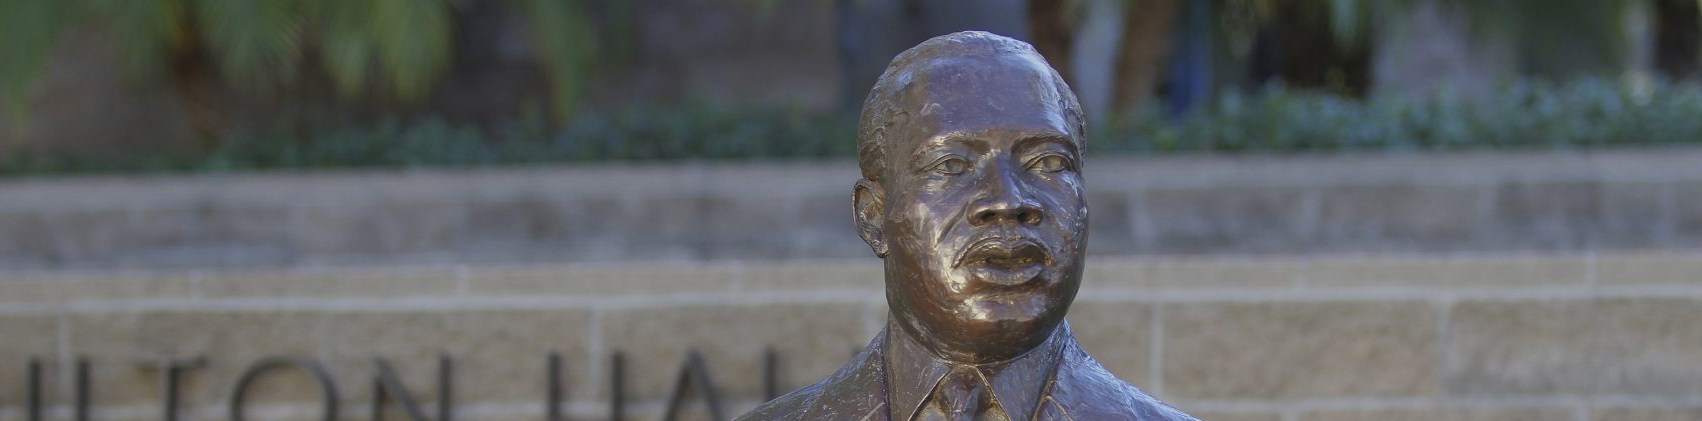 Martin Luther King Jr. bust on Chapman University campus.